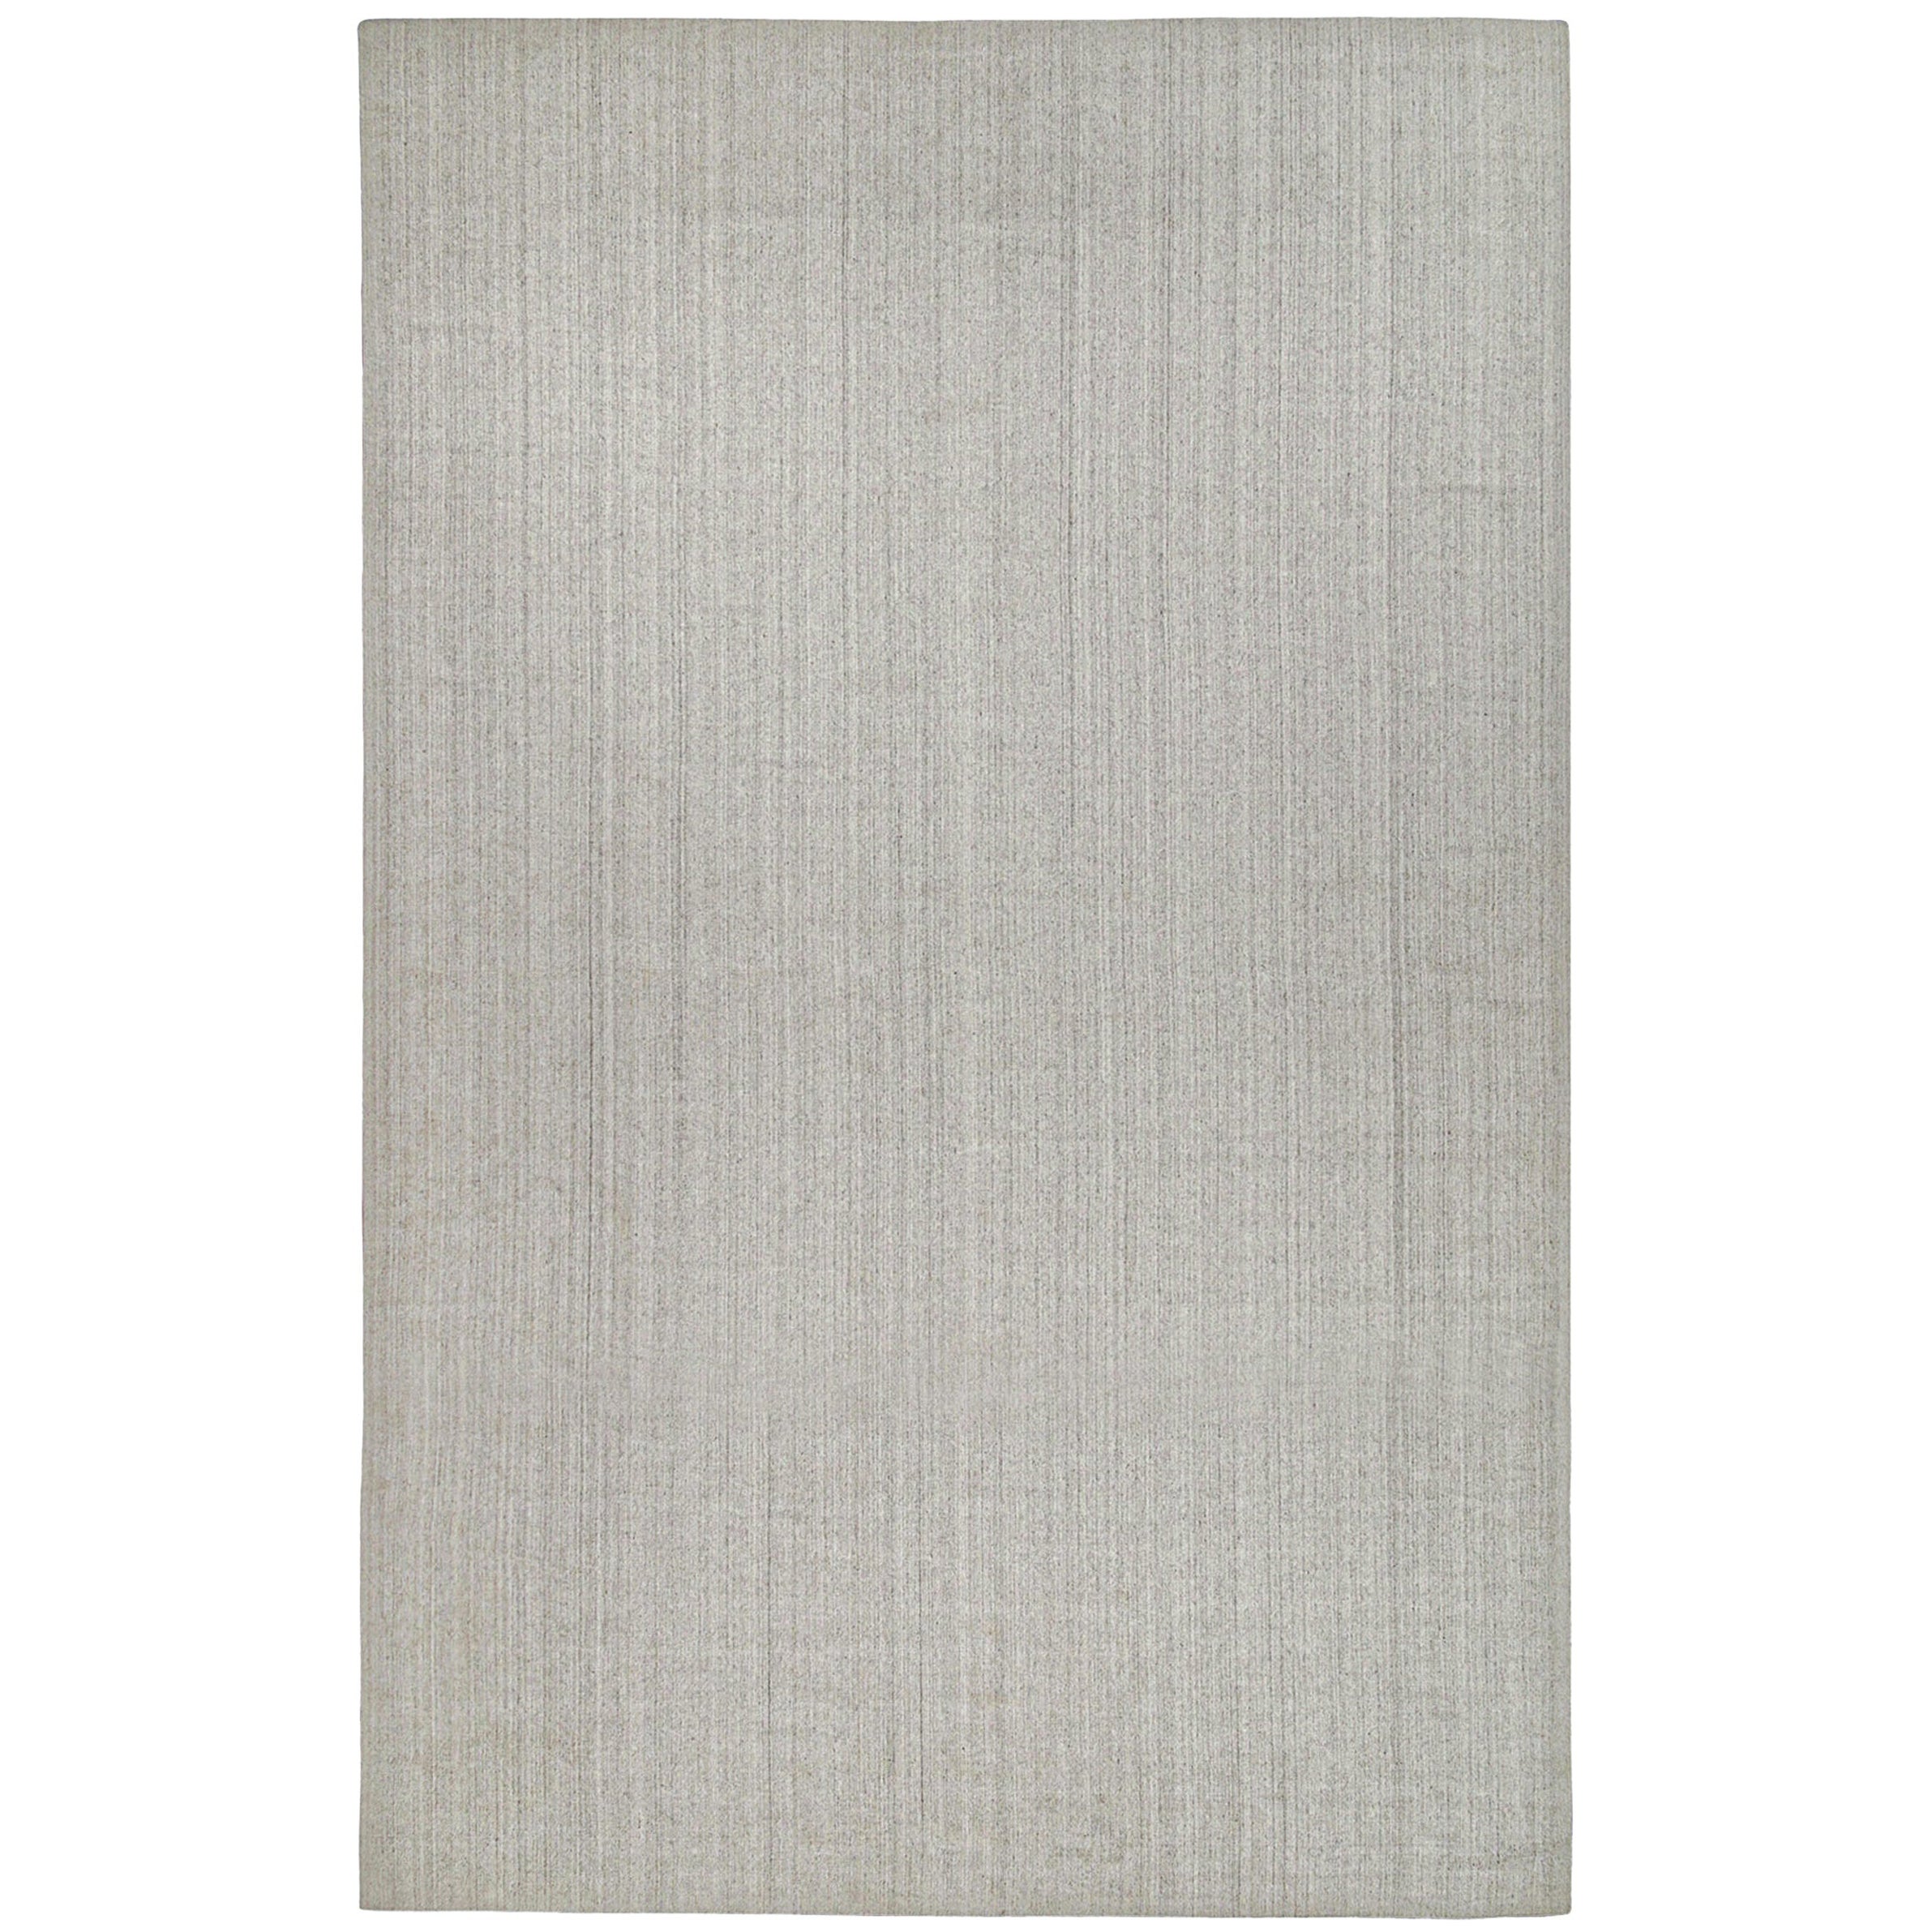 Rug & Kilim’s Modern Rug in Solid Gray and Off-White Striae